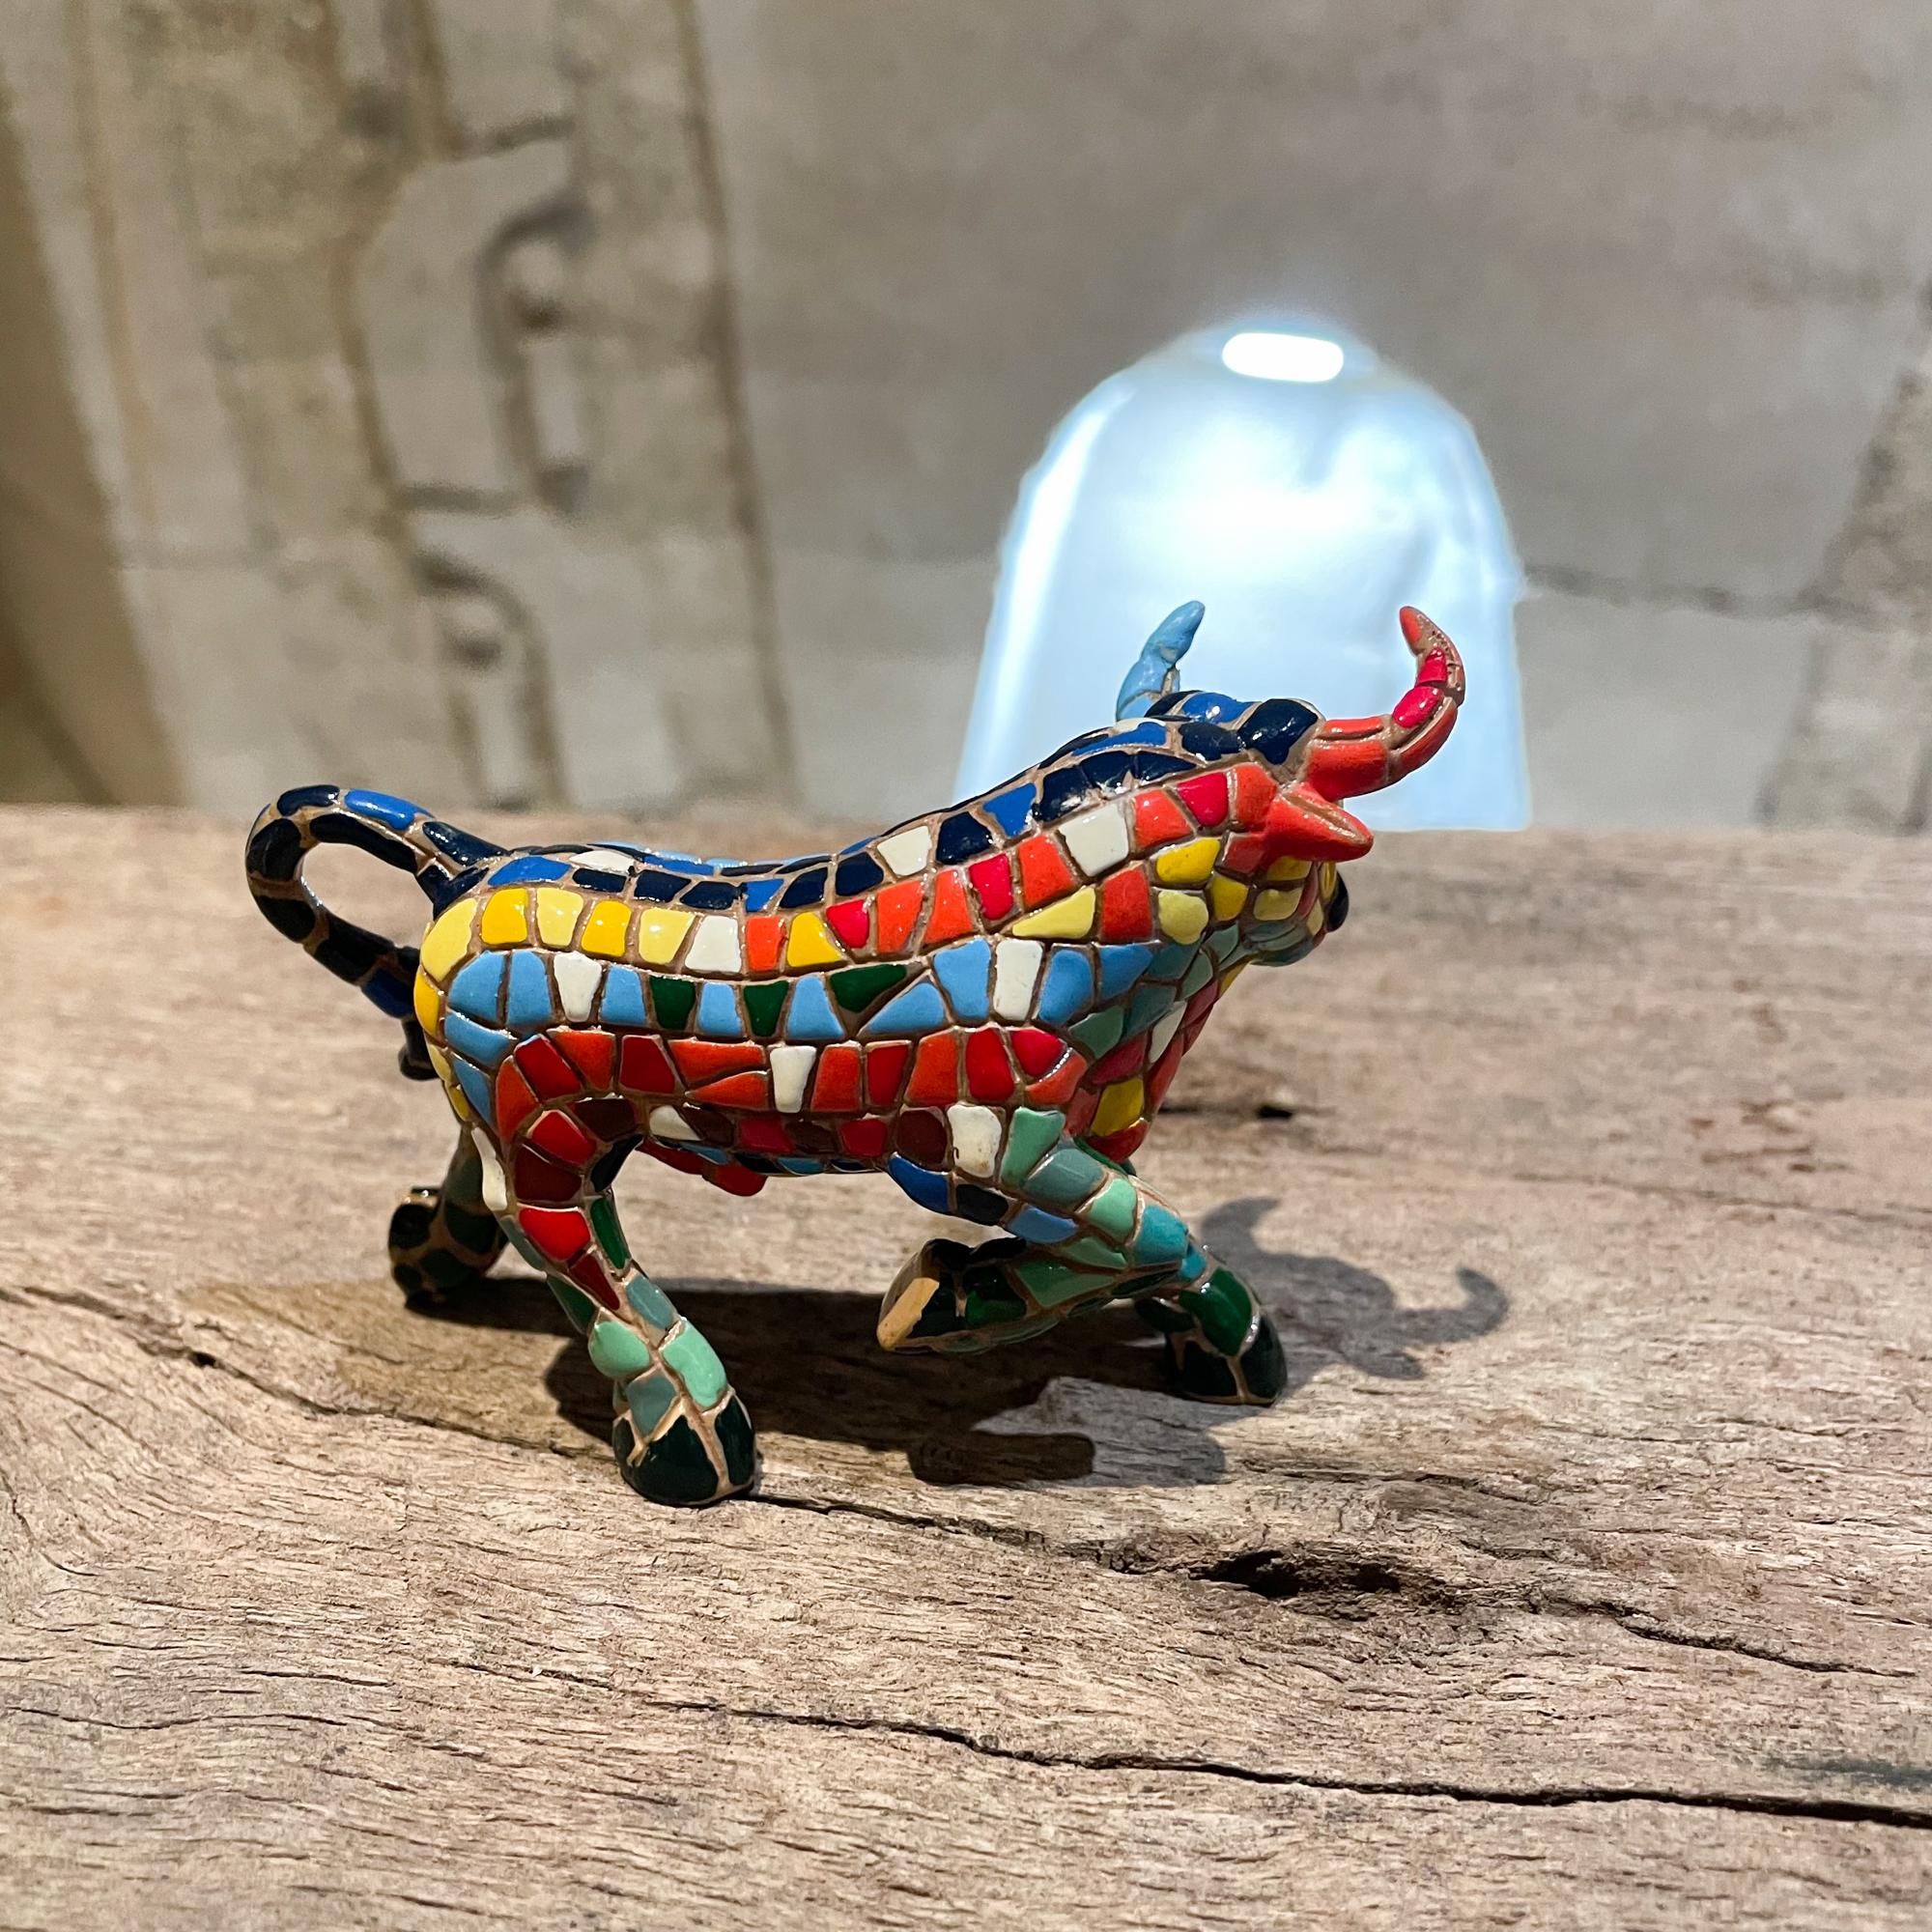 Handmade Tile Bull TORO Figurine Sculpture
Unmarked.
In the style of Mexican artist Genaro Alvarez.
Mosaic bull is handcrafted with a rainbow of colorful ceramic tiles.
2.5 H x 4 L x 1 D
Preowned Unrestored Good Vintage Condition 
Refer to our